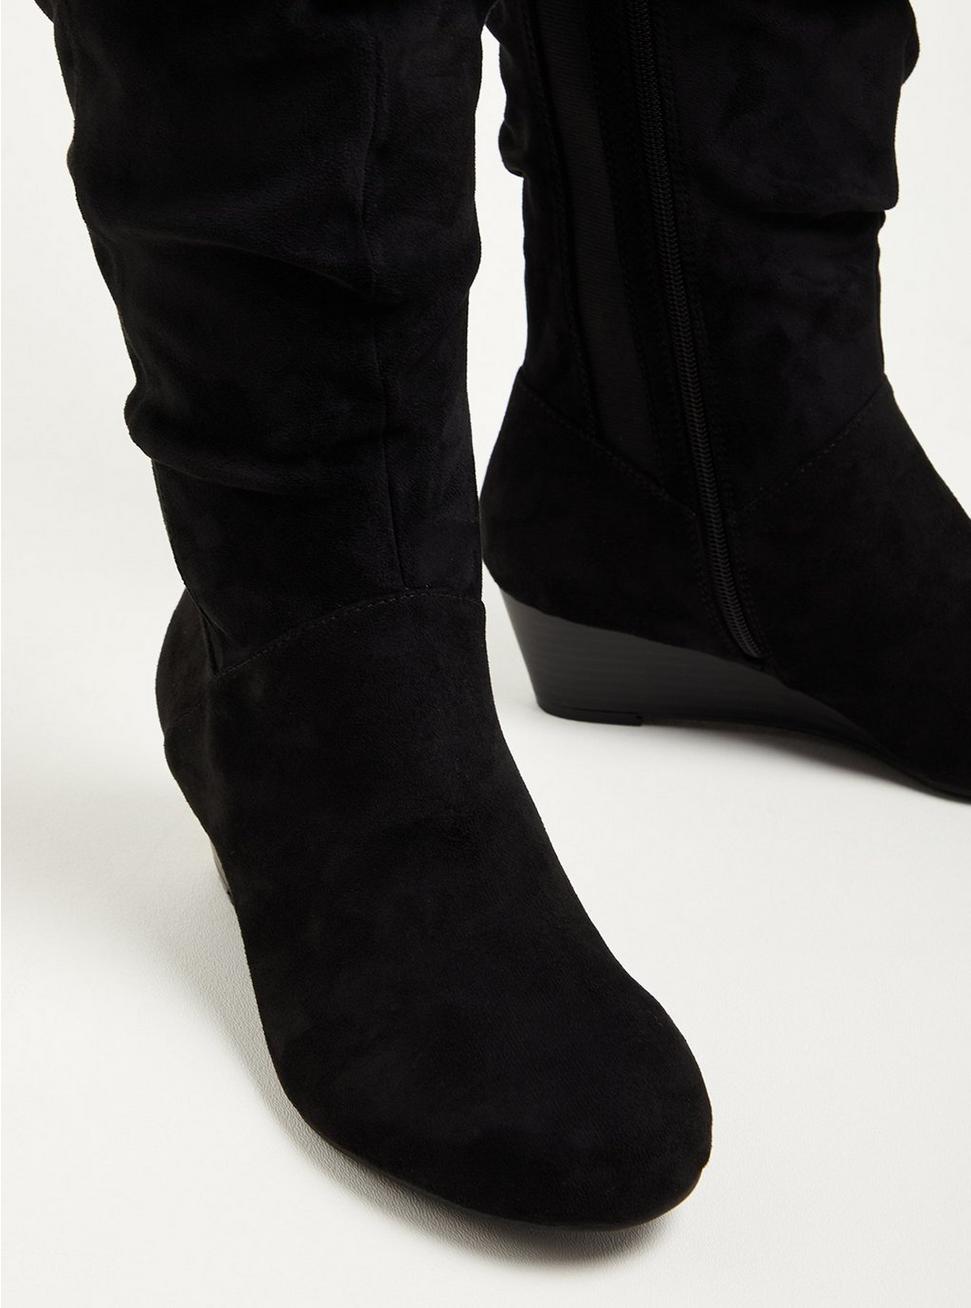 Plus Size Ruched Wedge Over The Knee Boot - Faux Suede Black (WW), BLACK, alternate